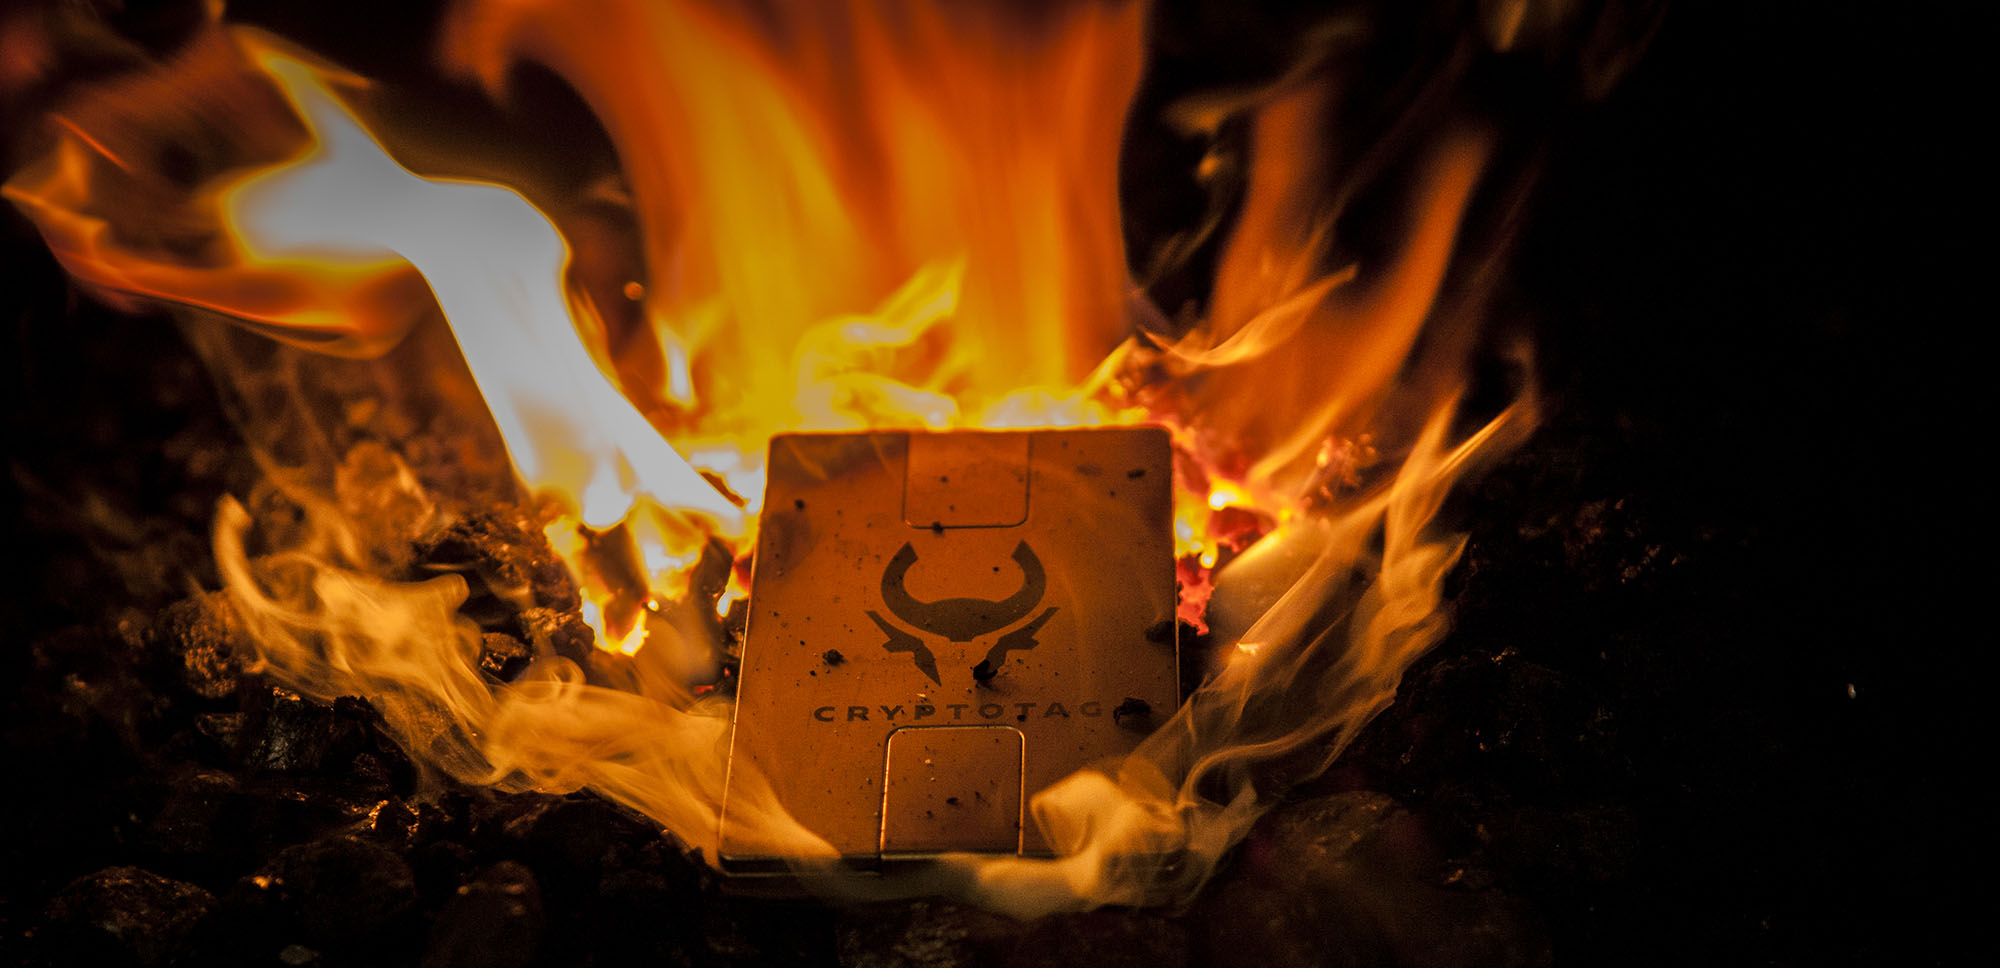 CRYPTOTAG in fire pit